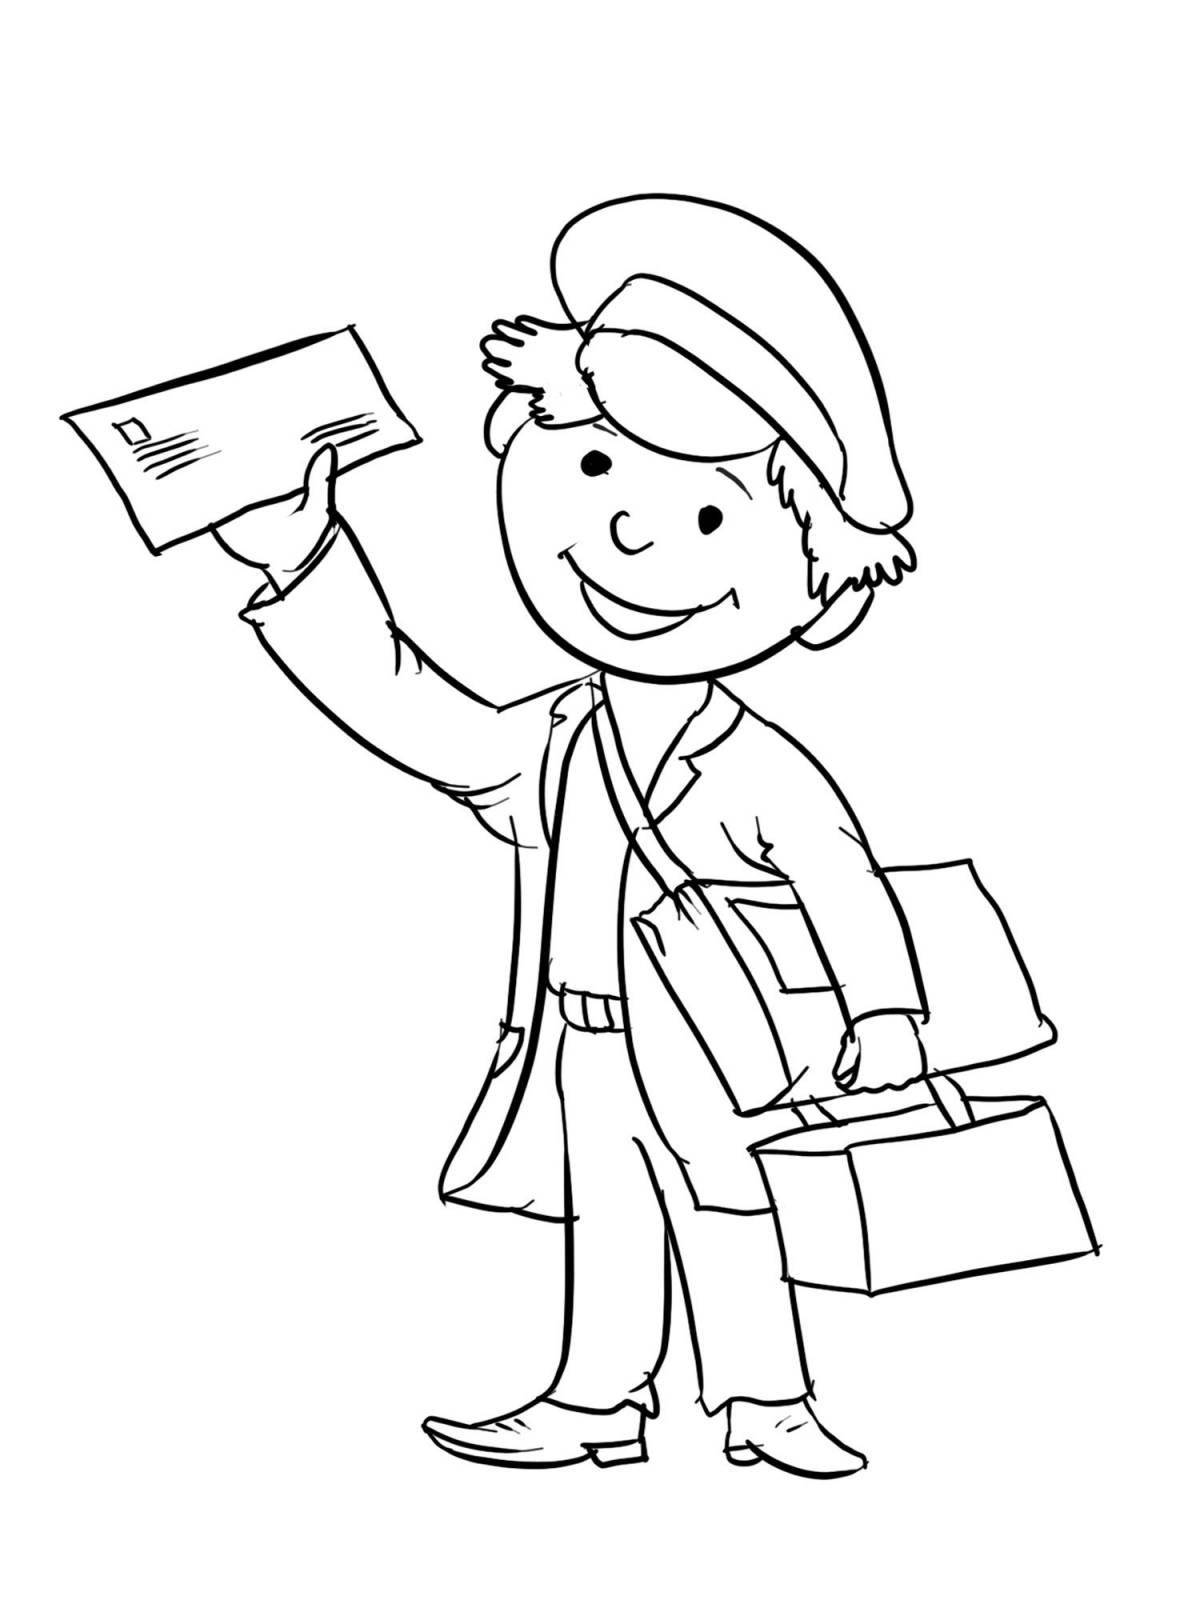 Colorful postman coloring book for kids